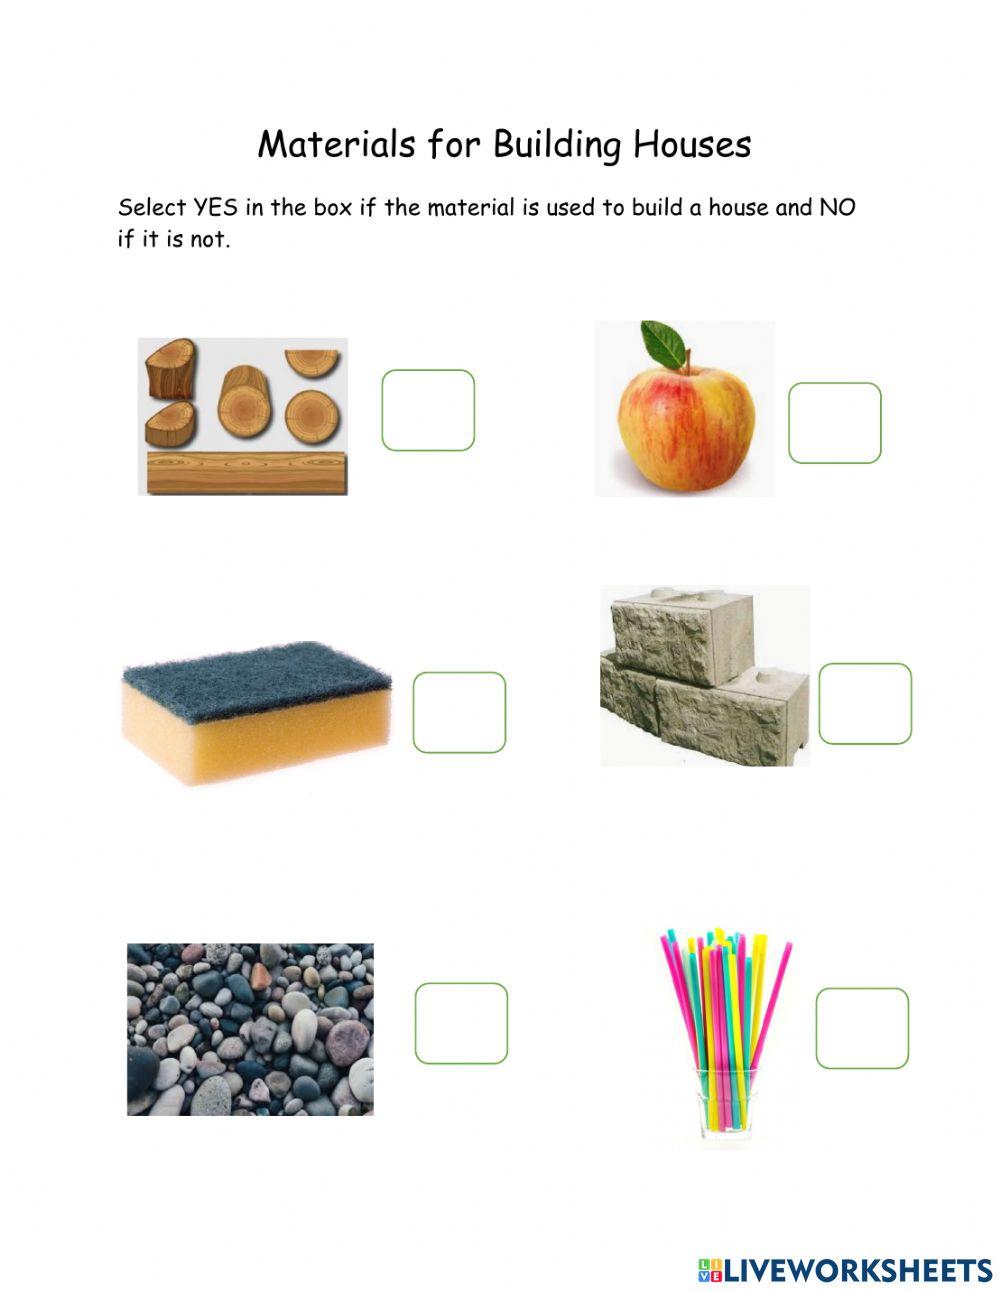 Materials to build a house